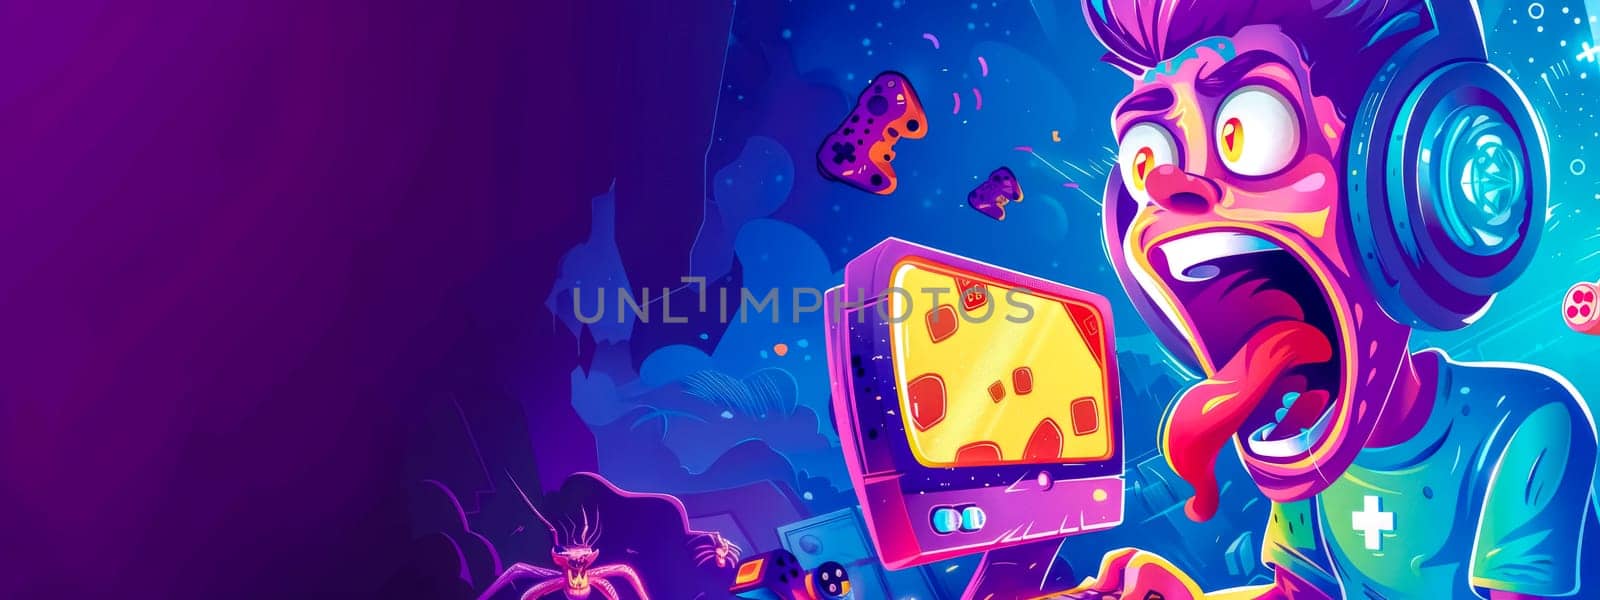 Cosmic gaming adventure - excited gamer in vibrant space by Edophoto